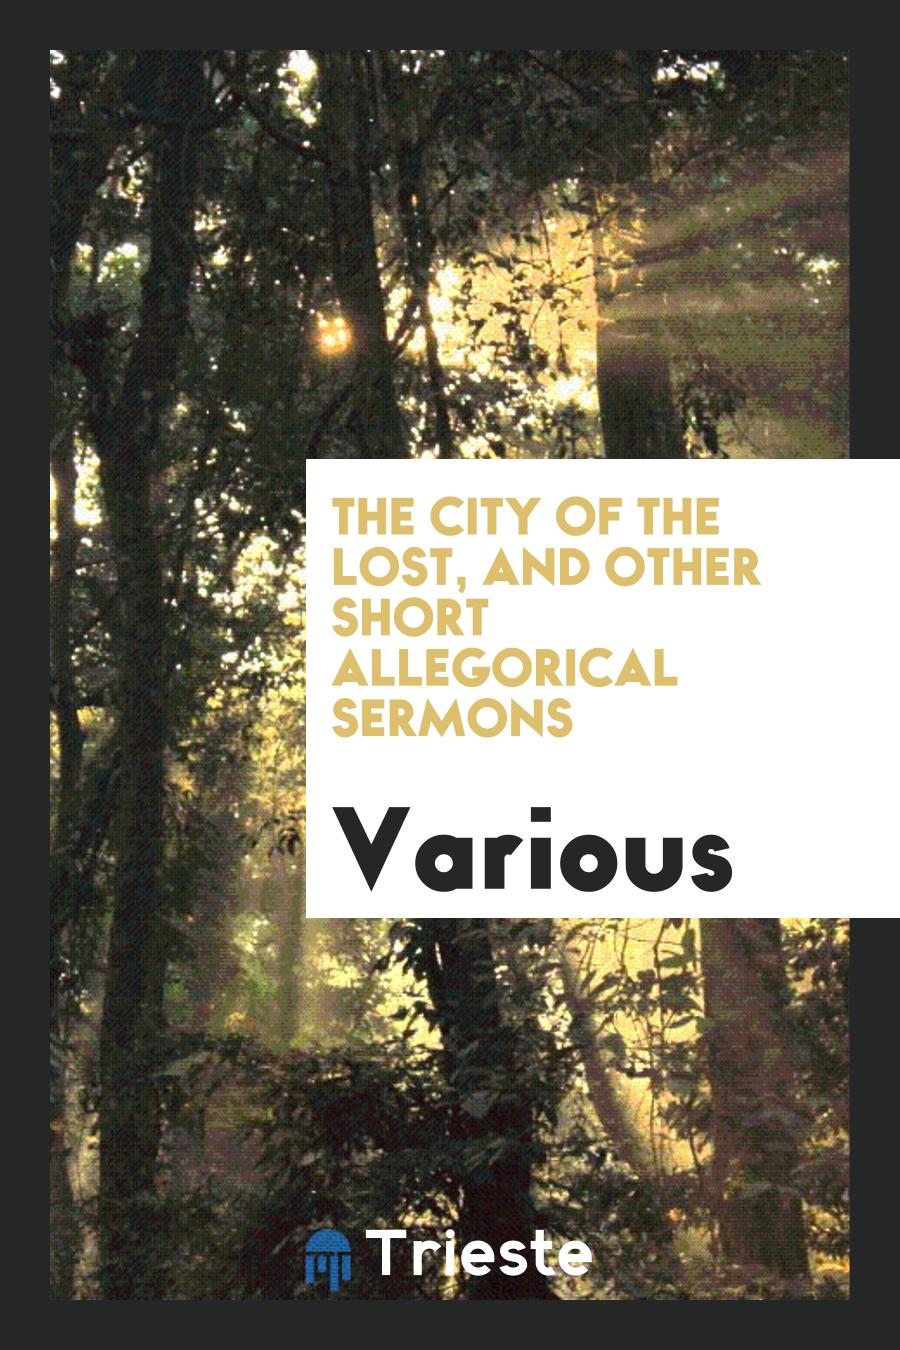 The City of the Lost, and Other Short Allegorical Sermons